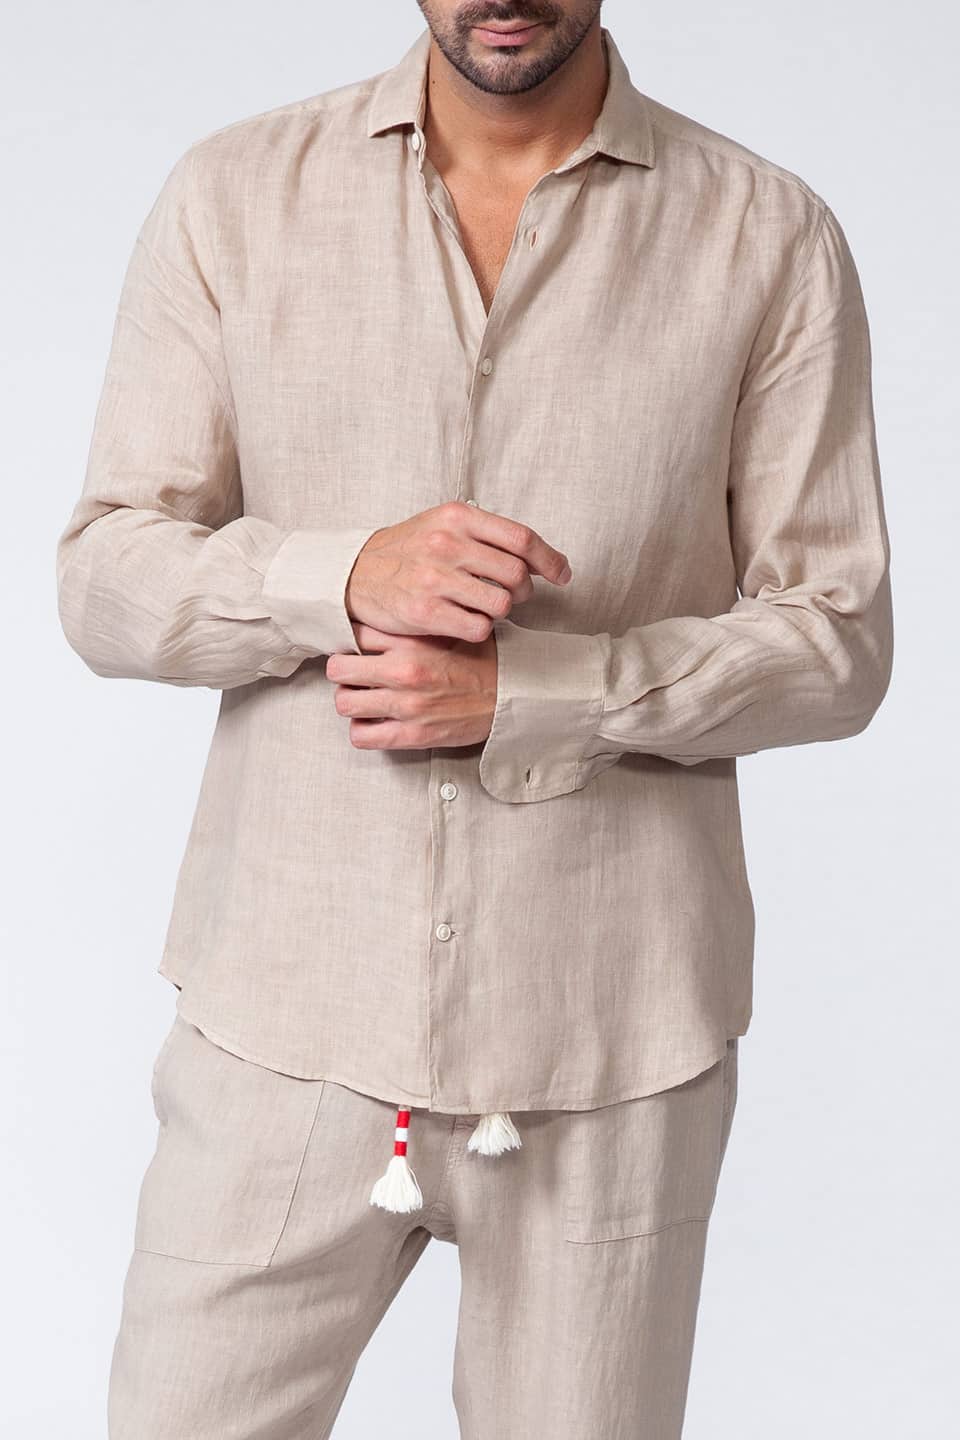 Thumbnail for Product gallery 5, MC saint barth male pamplona shirt beige sleeve